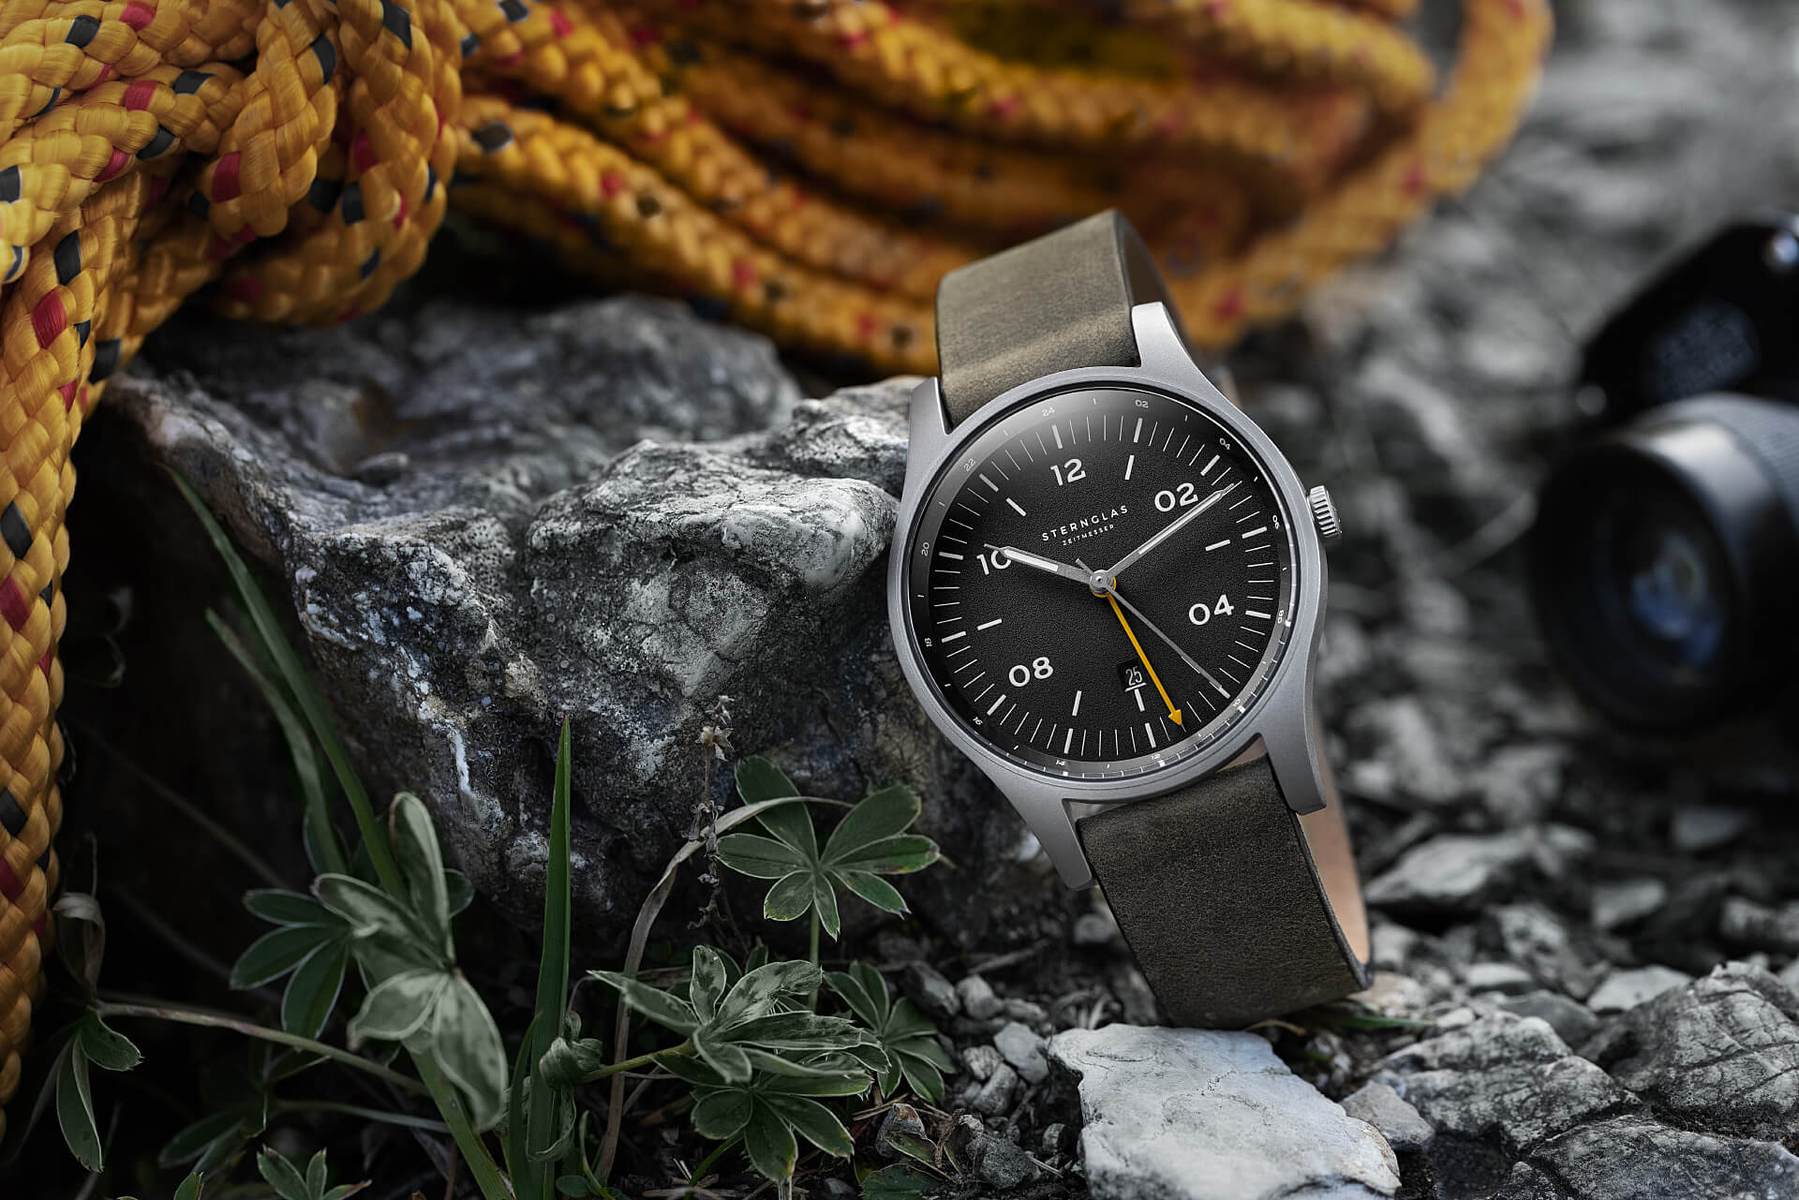 Sternglas Taiga GMT Field Watch | Review